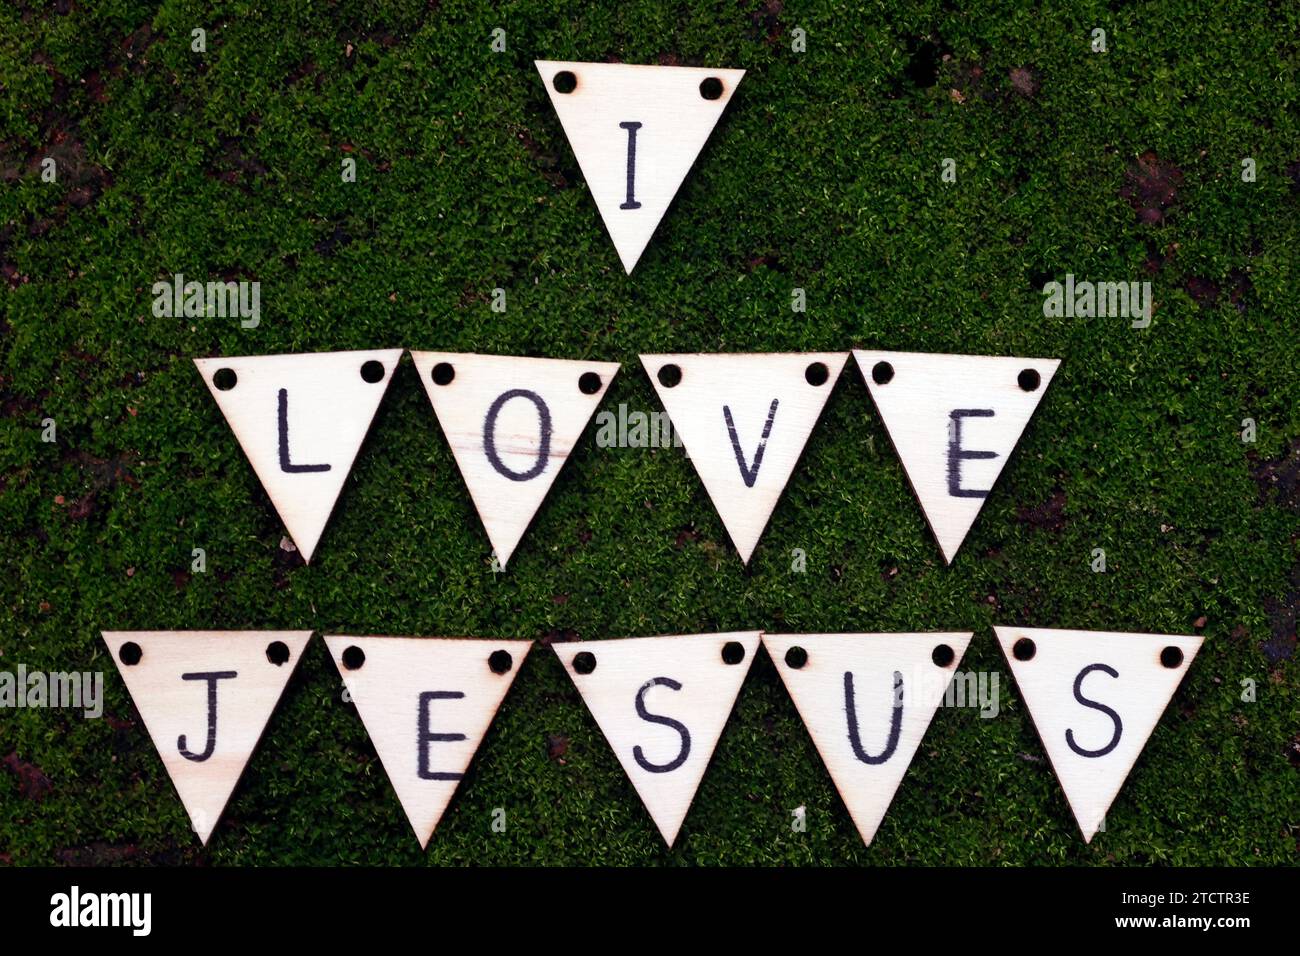 Wooden letters forming the word JESUS. I love Jesus. Christian symbol. Stock Photo